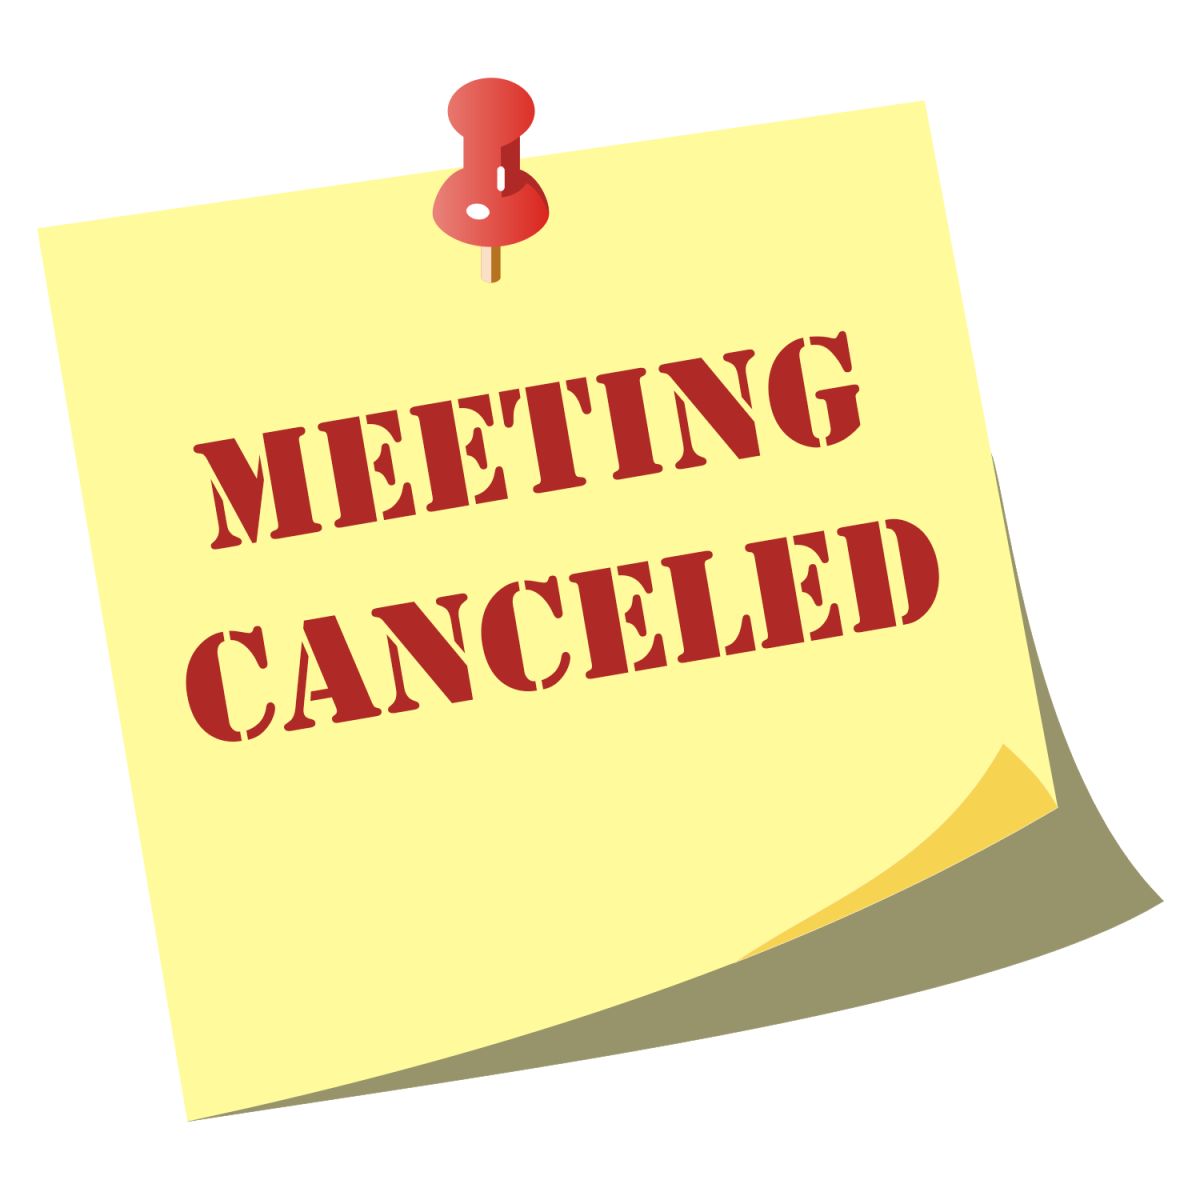 Post-it note showing the words "Meeting Canceled"